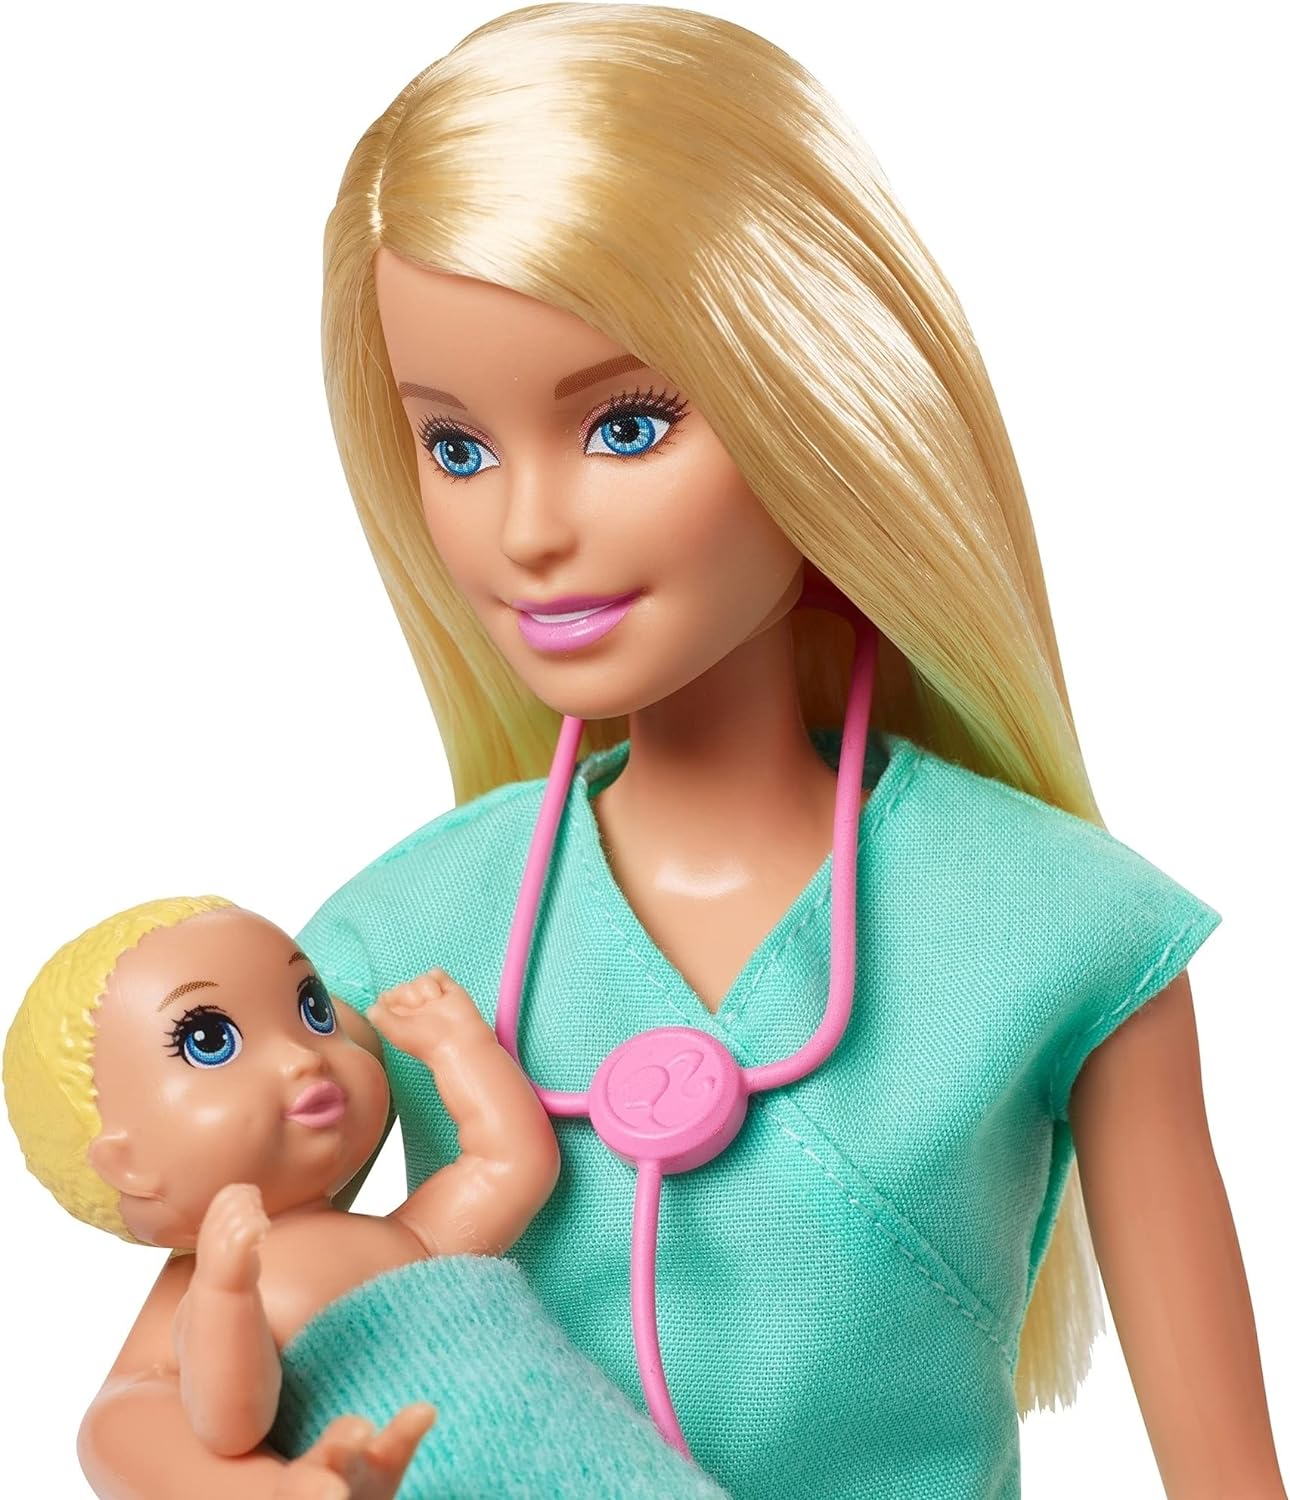 Barbie Baby Doctor Playset with Blonde Doll, 2 Infant Dolls, Toy Pieces, Multi